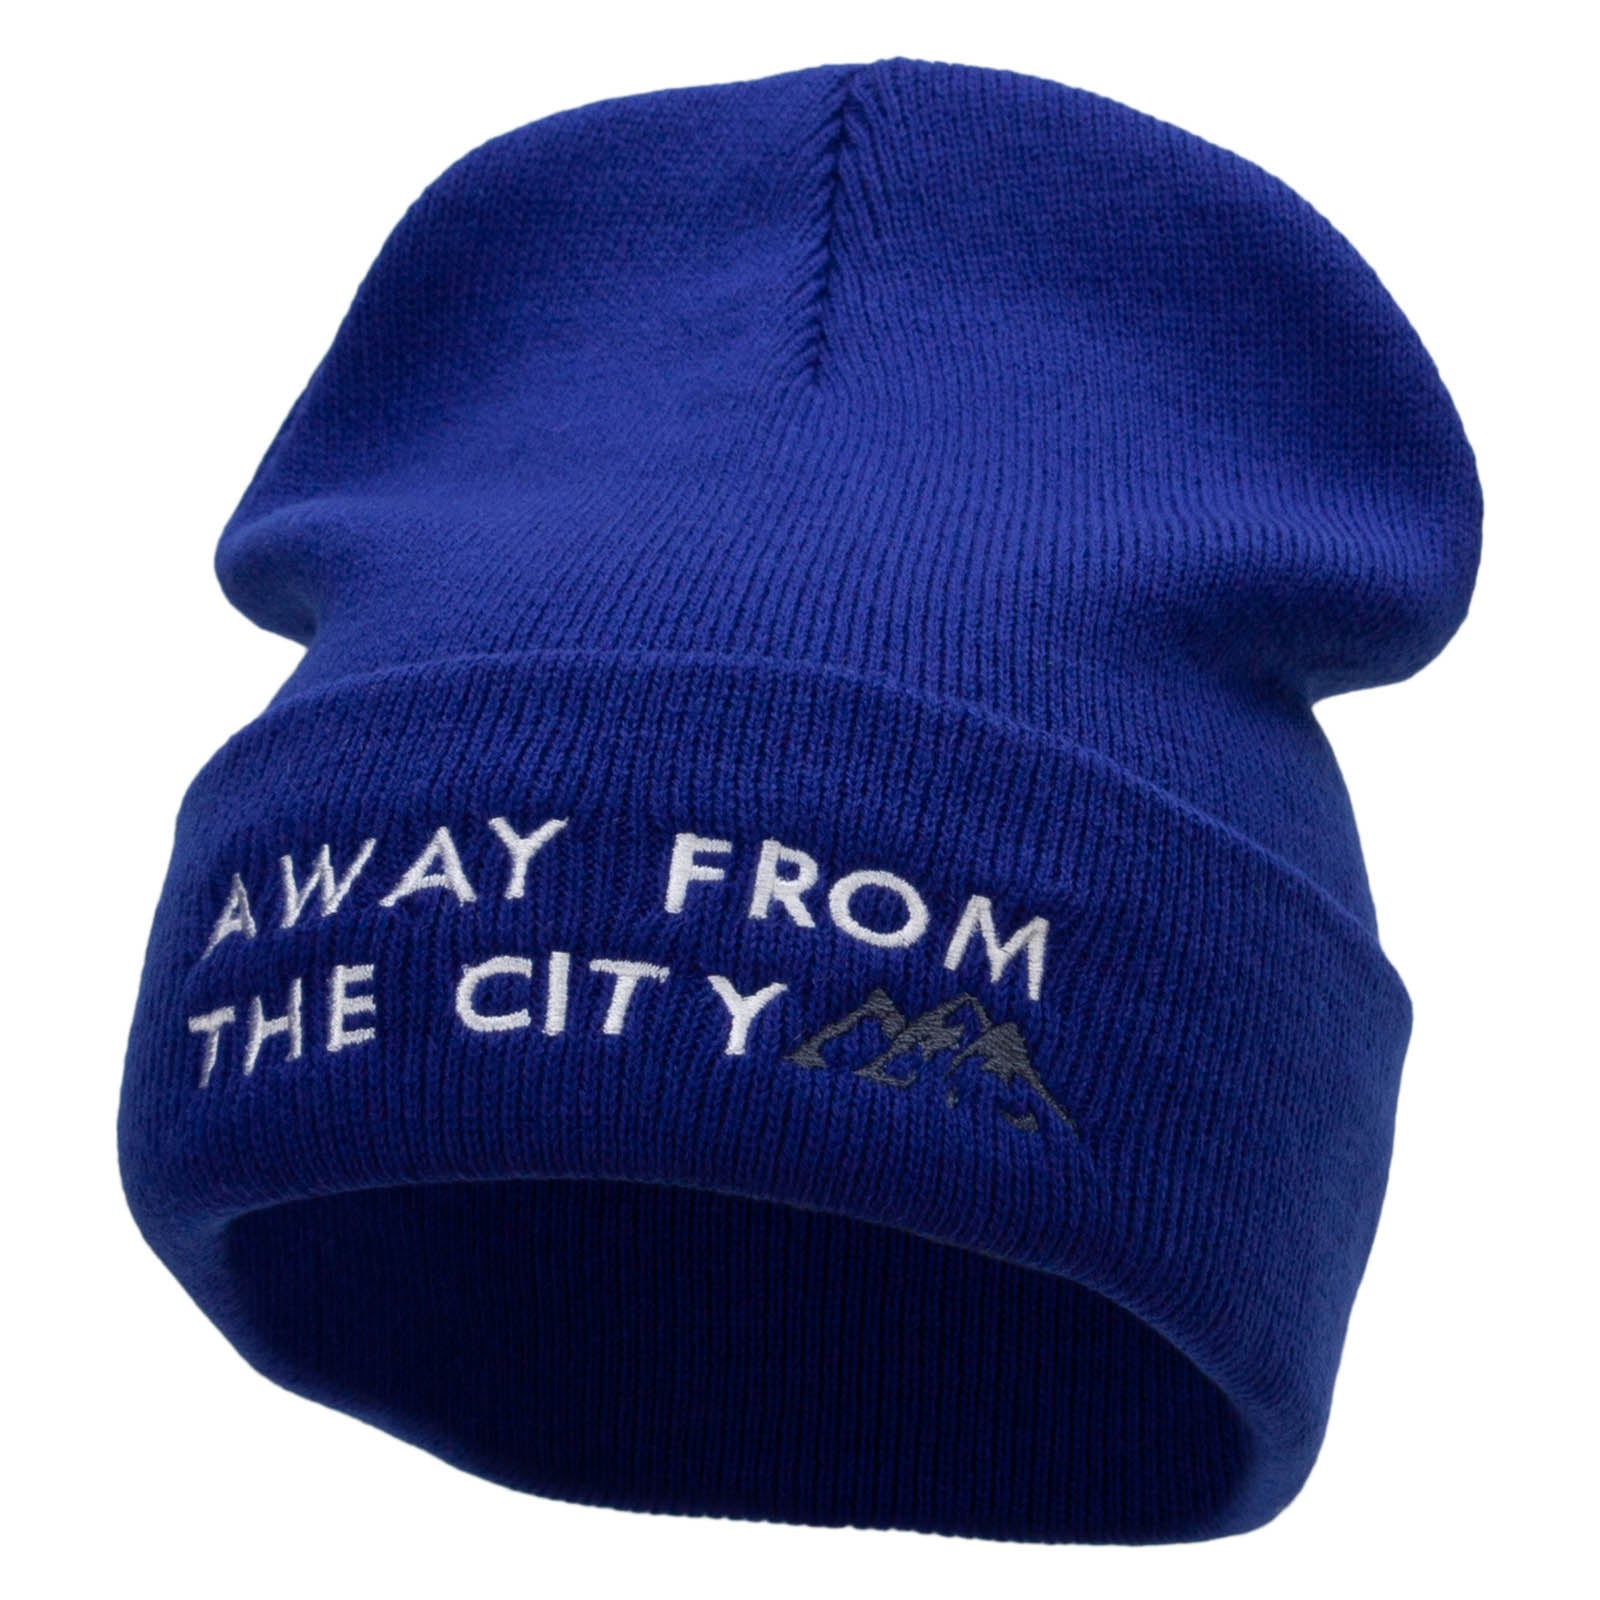 Away From The City Embroidered 12 Inch Long Knitted Beanie - Royal OSFM